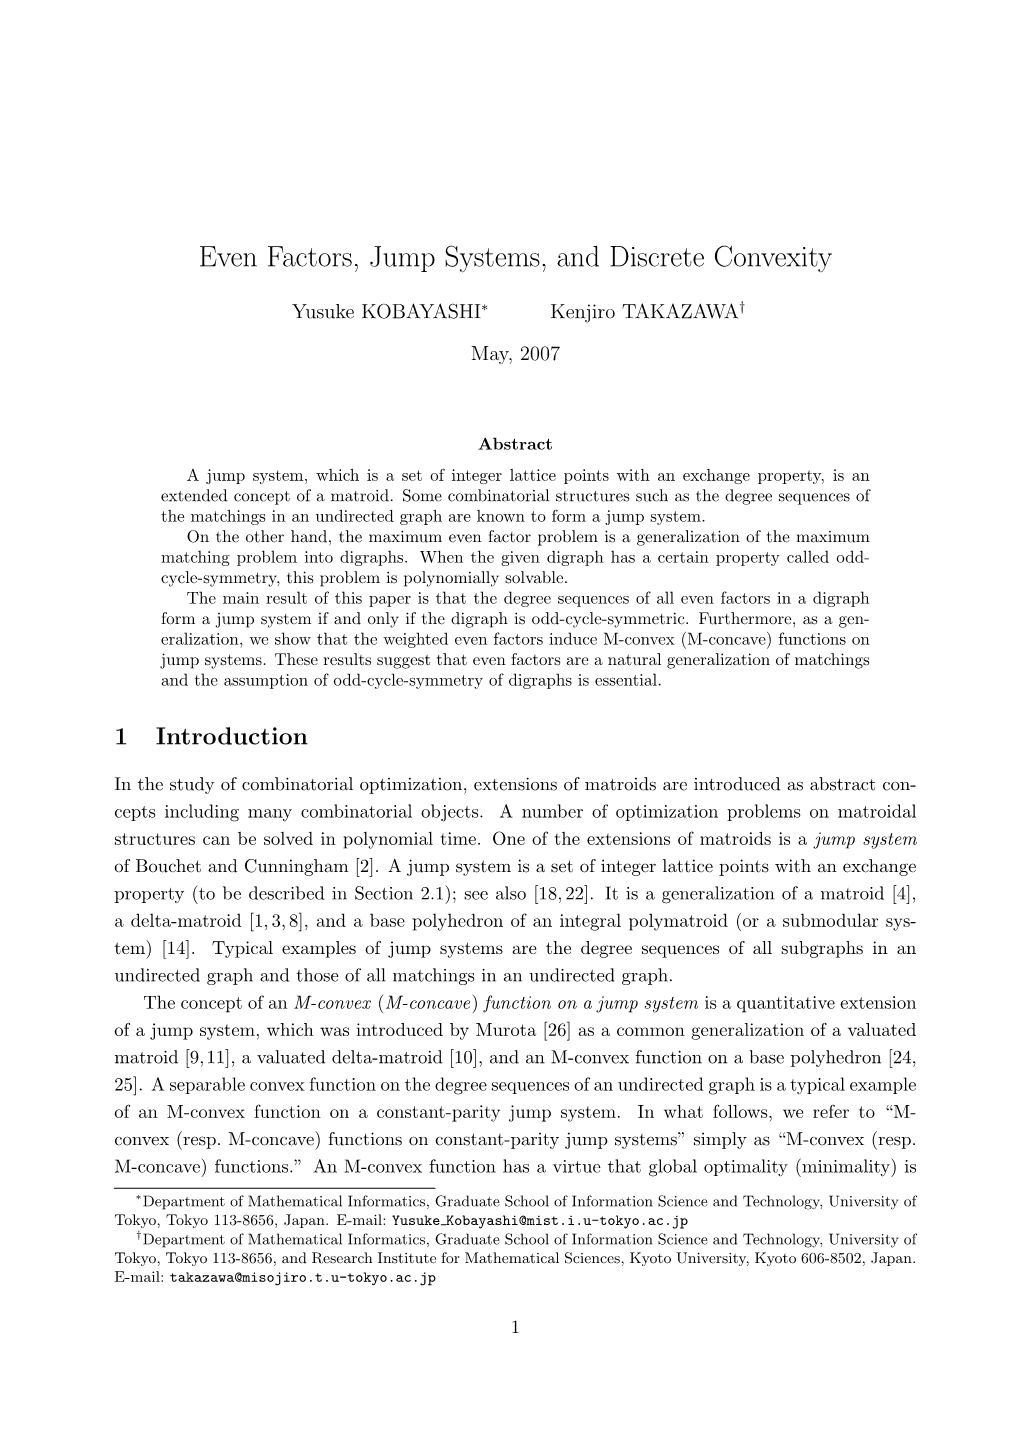 Even Factors, Jump Systems, and Discrete Convexity